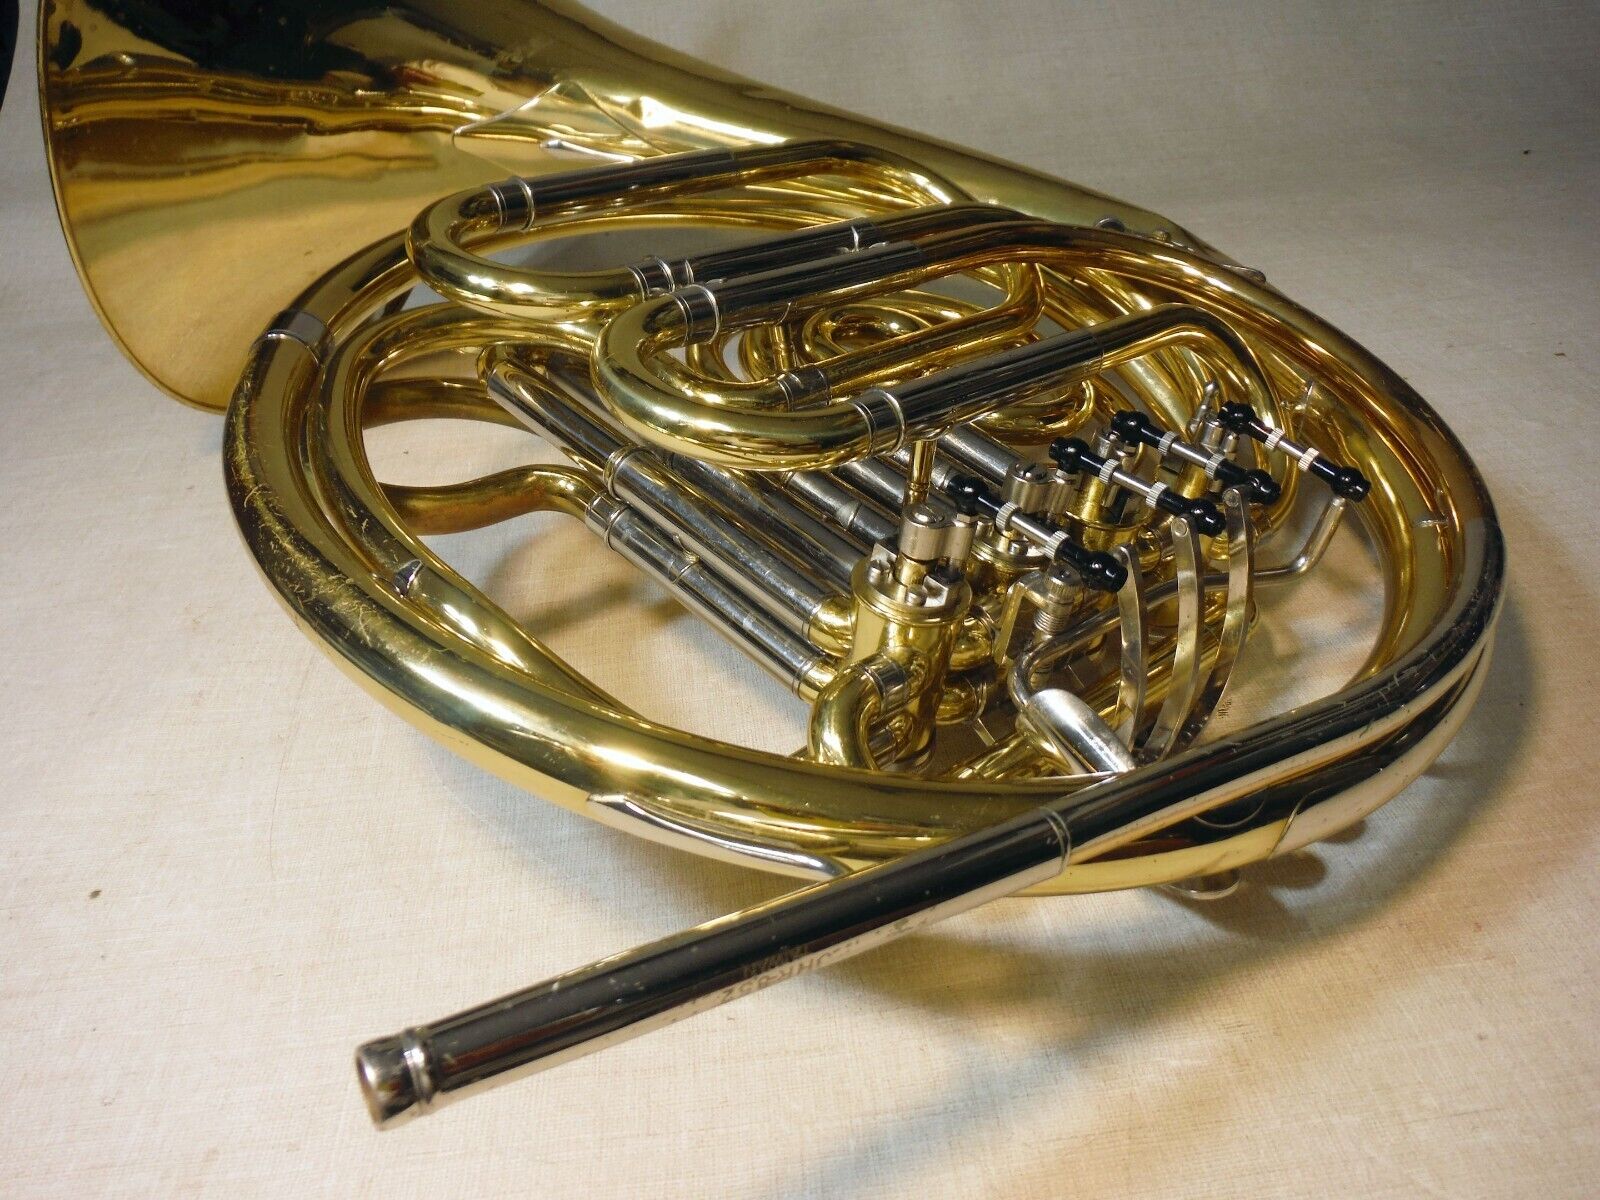 JUPITER JHR-852 DOUBLE FRENCH HORN BRASS WORKING GOOD W/DENTS CASE MOUTHPIECE 12